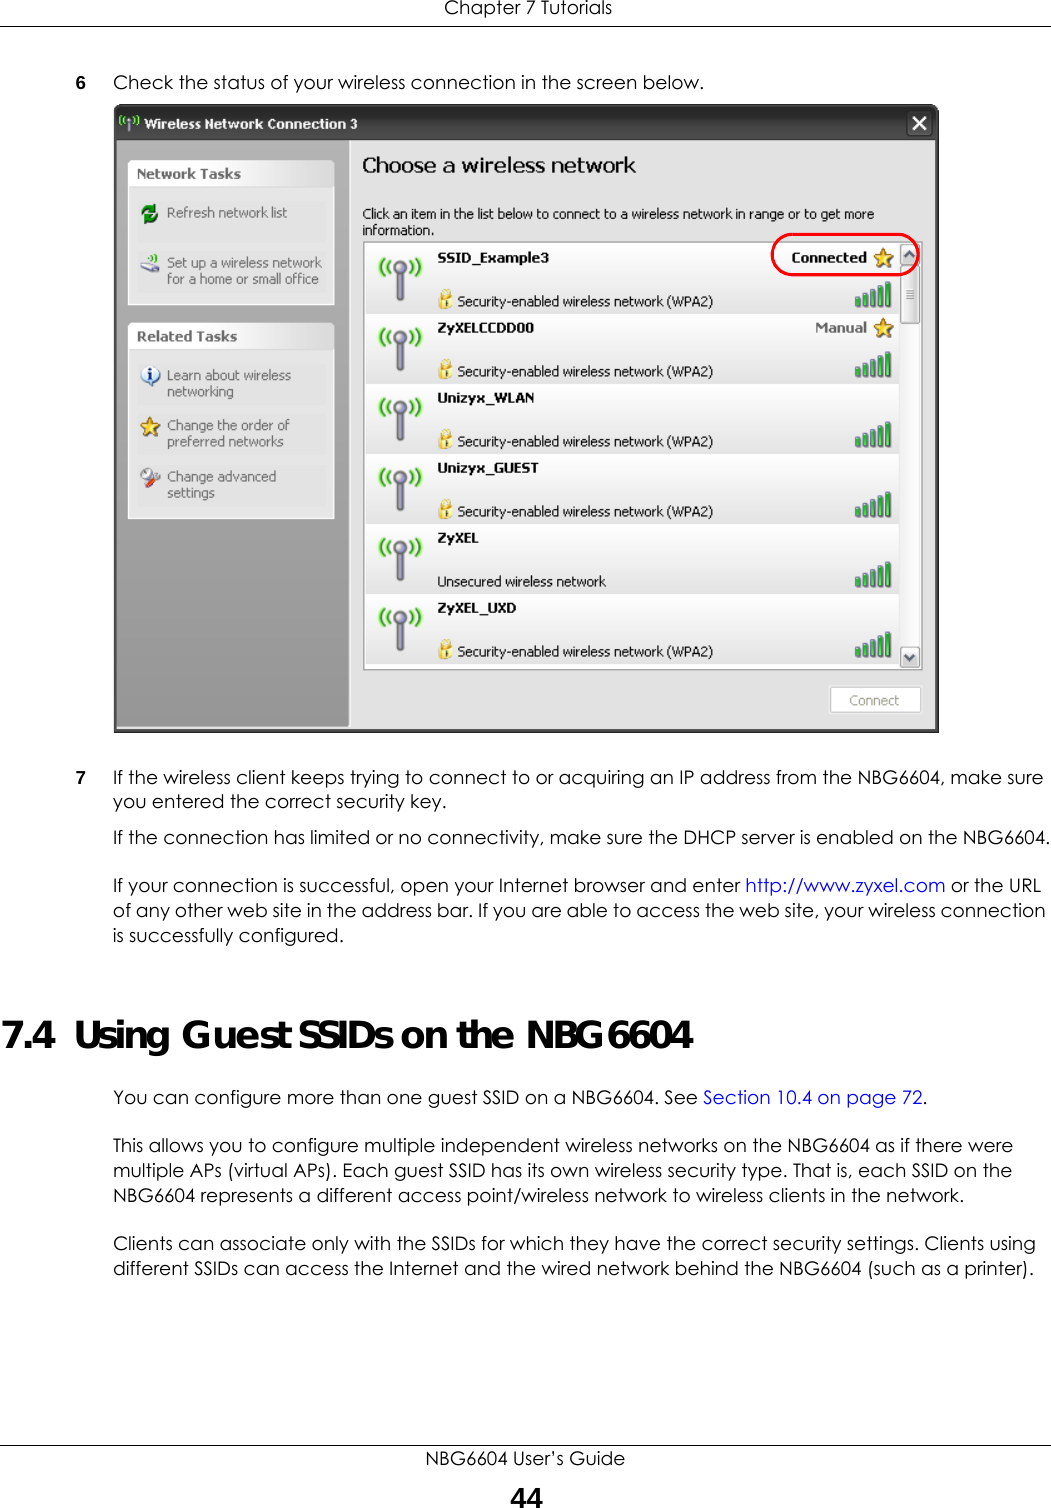  Chapter 7 TutorialsNBG6604 User’s Guide446Check the status of your wireless connection in the screen below.  7If the wireless client keeps trying to connect to or acquiring an IP address from the NBG6604, make sure you entered the correct security key.If the connection has limited or no connectivity, make sure the DHCP server is enabled on the NBG6604.If your connection is successful, open your Internet browser and enter http://www.zyxel.com or the URL of any other web site in the address bar. If you are able to access the web site, your wireless connection is successfully configured.7.4  Using Guest SSIDs on the NBG6604You can configure more than one guest SSID on a NBG6604. See Section 10.4 on page 72. This allows you to configure multiple independent wireless networks on the NBG6604 as if there were multiple APs (virtual APs). Each guest SSID has its own wireless security type. That is, each SSID on the NBG6604 represents a different access point/wireless network to wireless clients in the network. Clients can associate only with the SSIDs for which they have the correct security settings. Clients using different SSIDs can access the Internet and the wired network behind the NBG6604 (such as a printer).